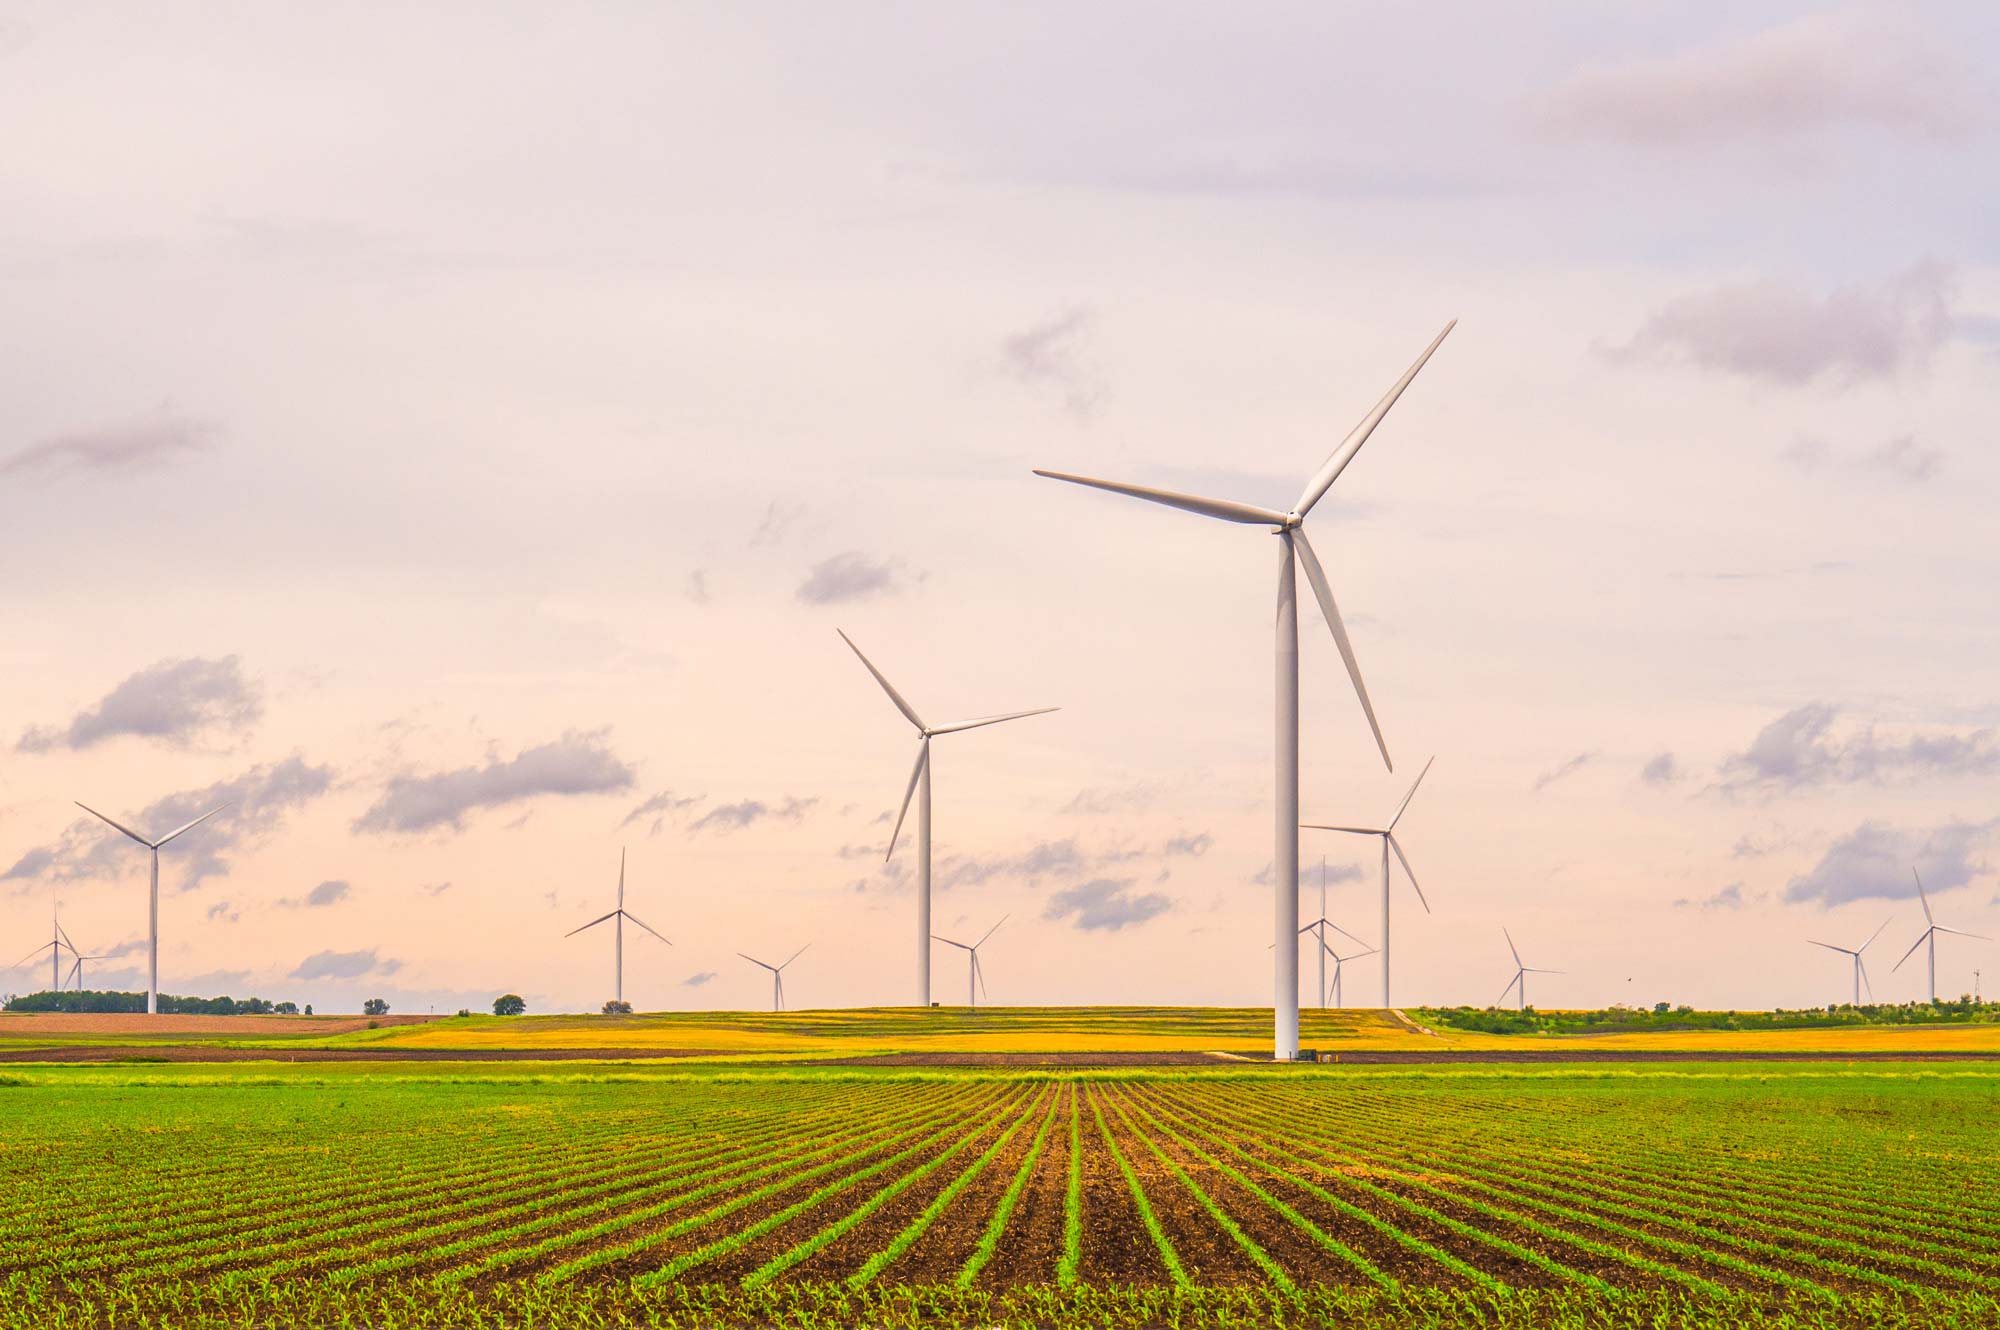 Wind turbines in field across agricultural lands in Midwest